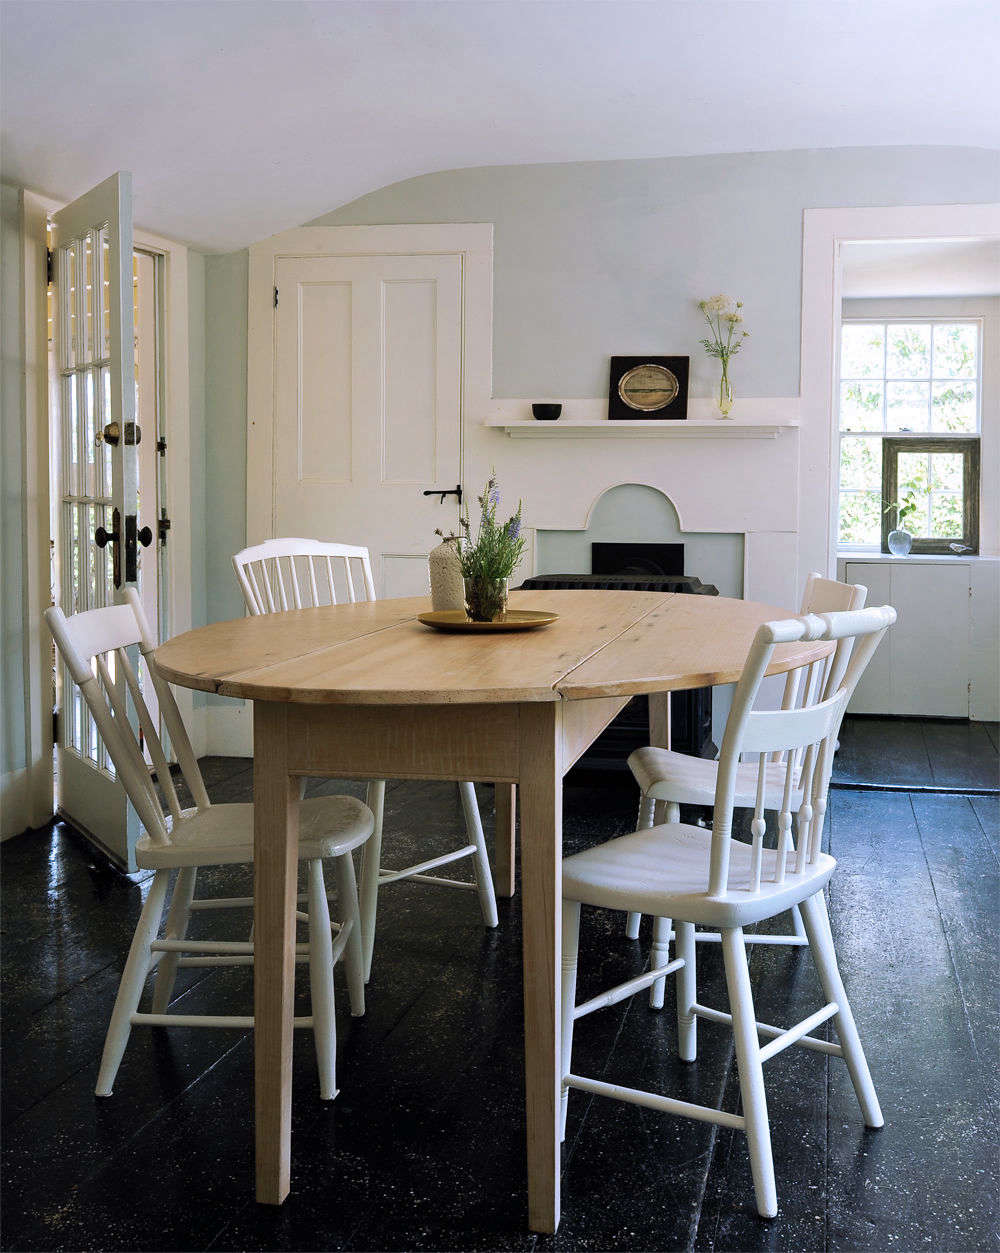 Justine Hand Cottage Cape Cod Dining Room